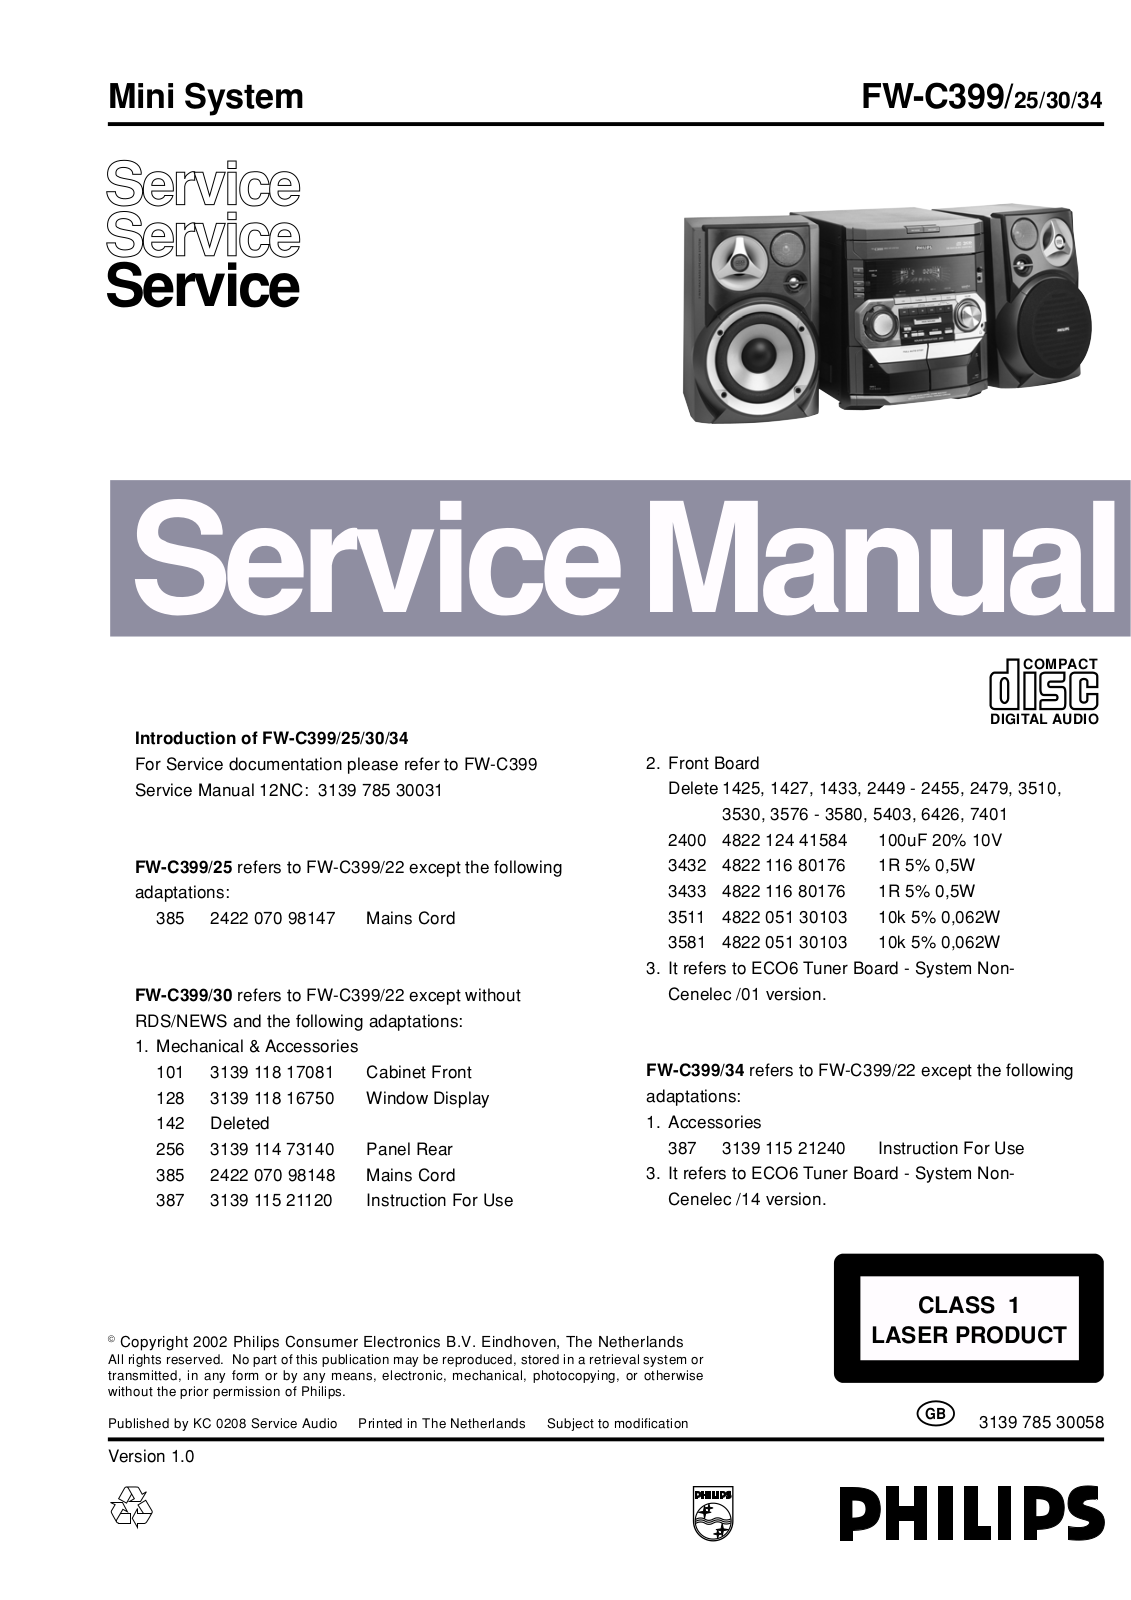 Philips FWC-399 Service manual